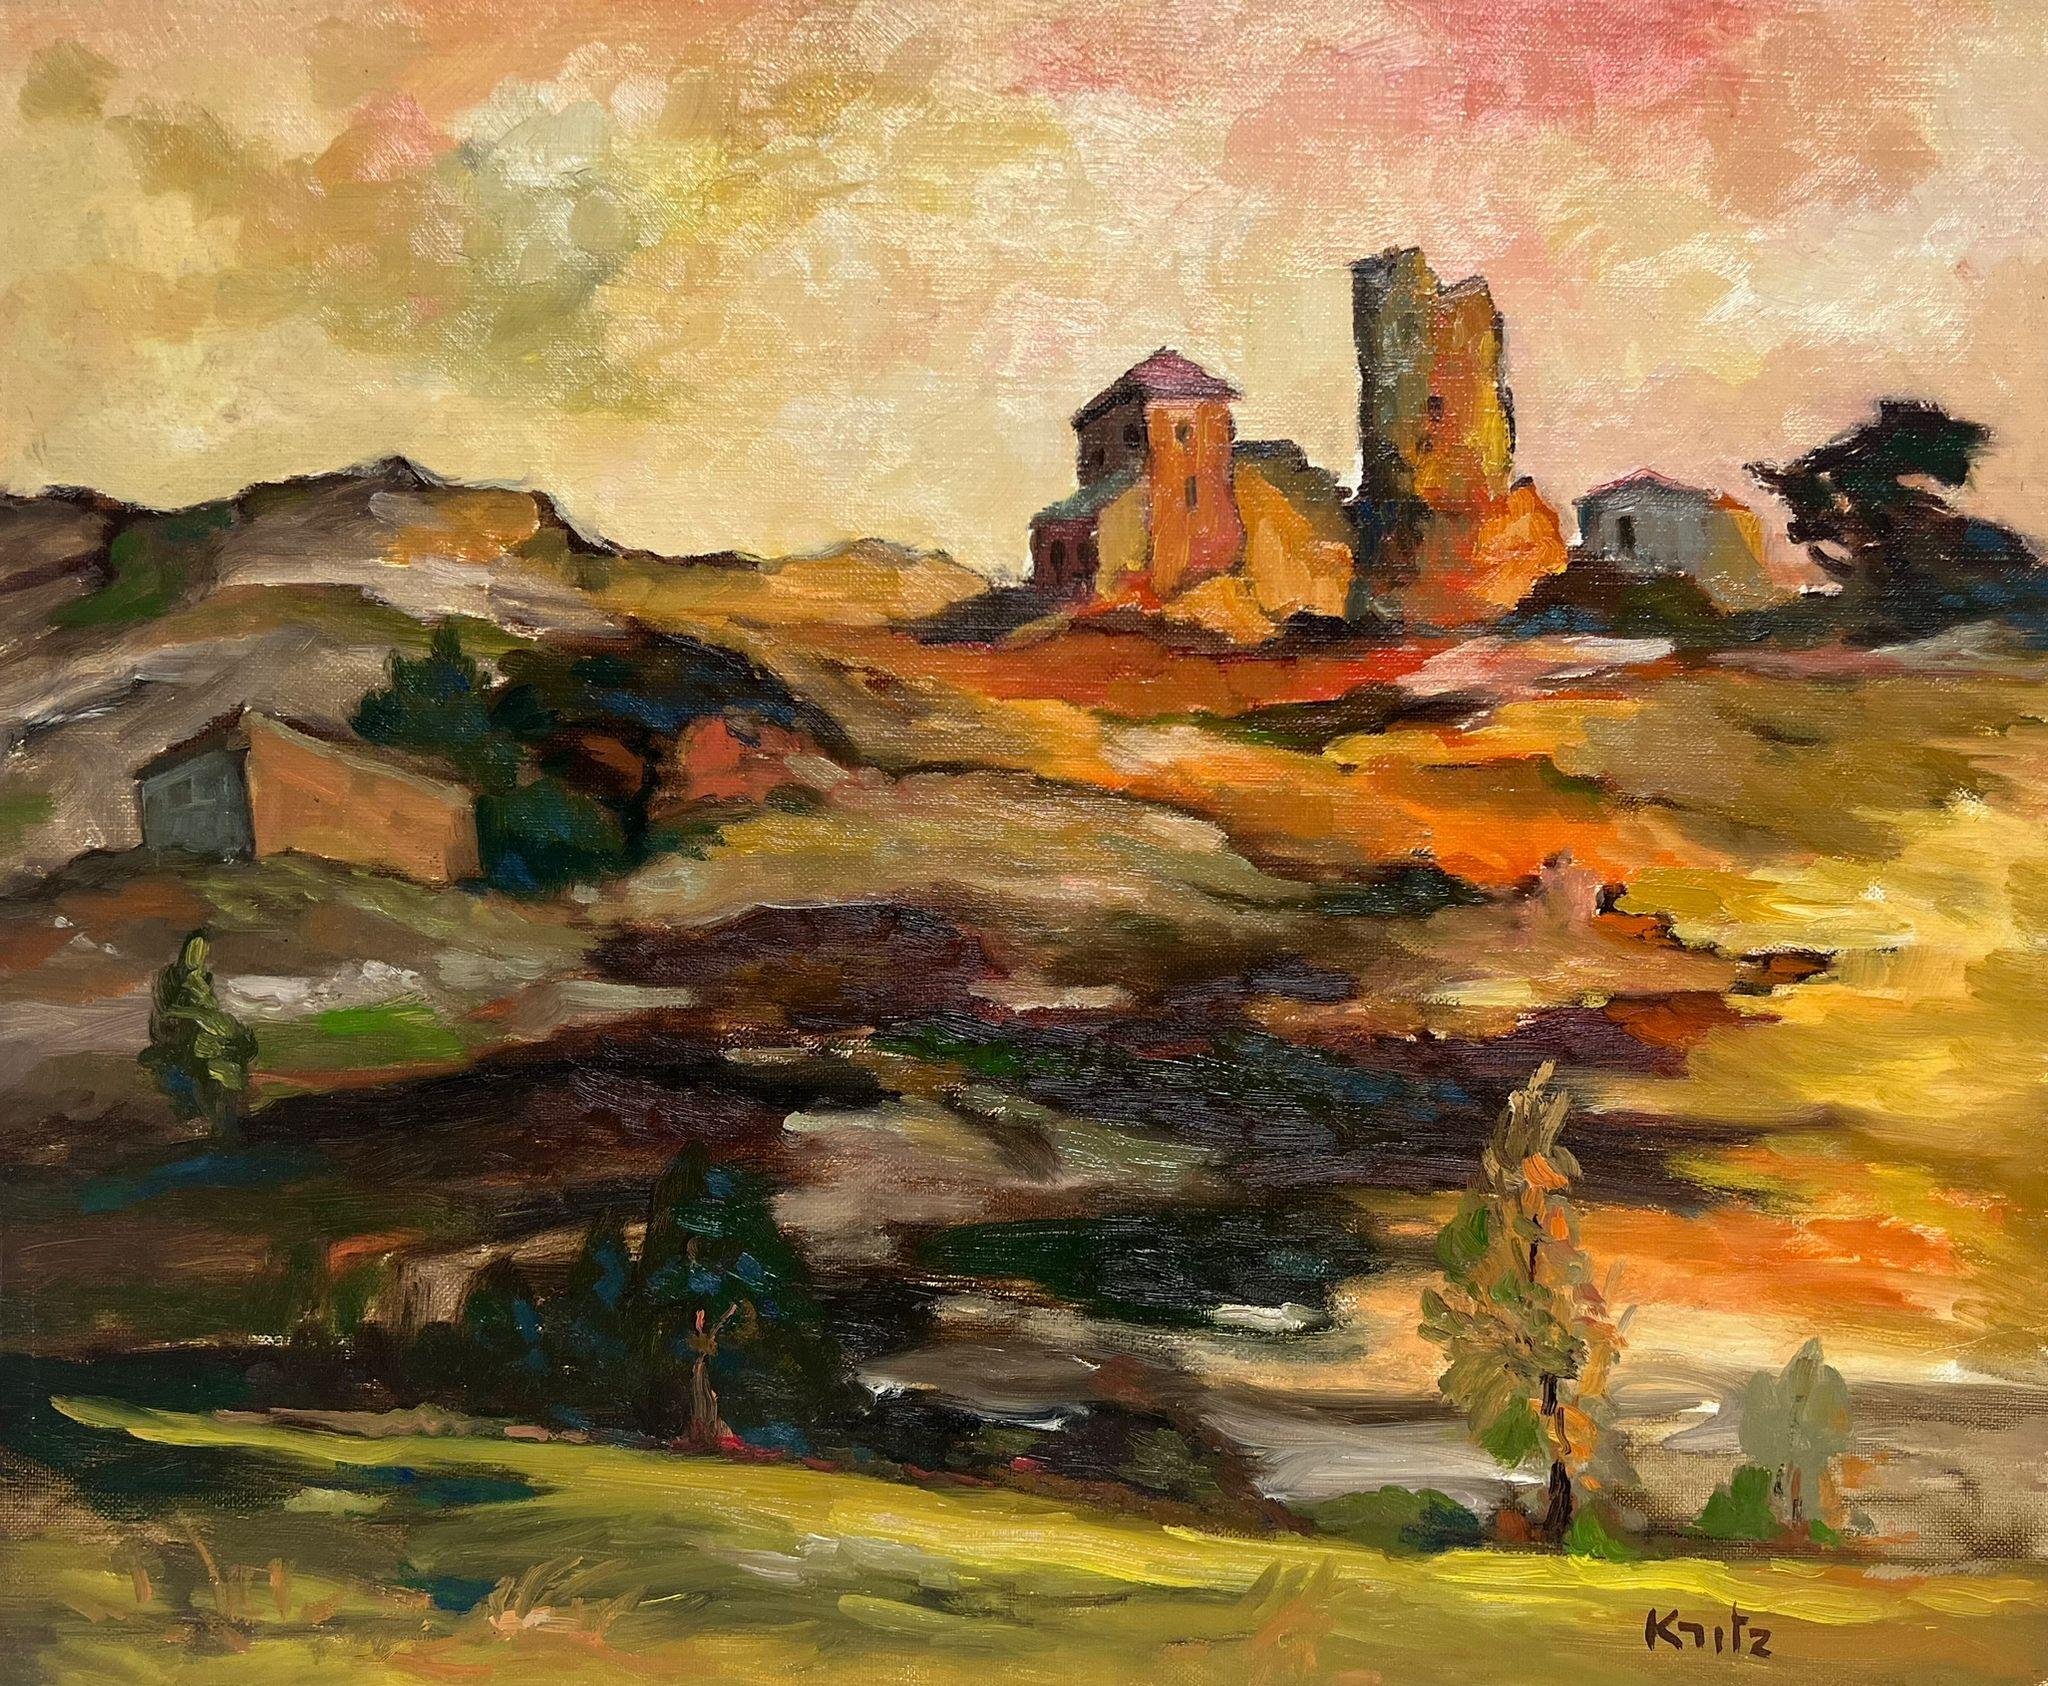 Michel Kritz Landscape Painting - French Post Impressionist Signed Oil Painting Sunset Old Chateau Ruins Landscape